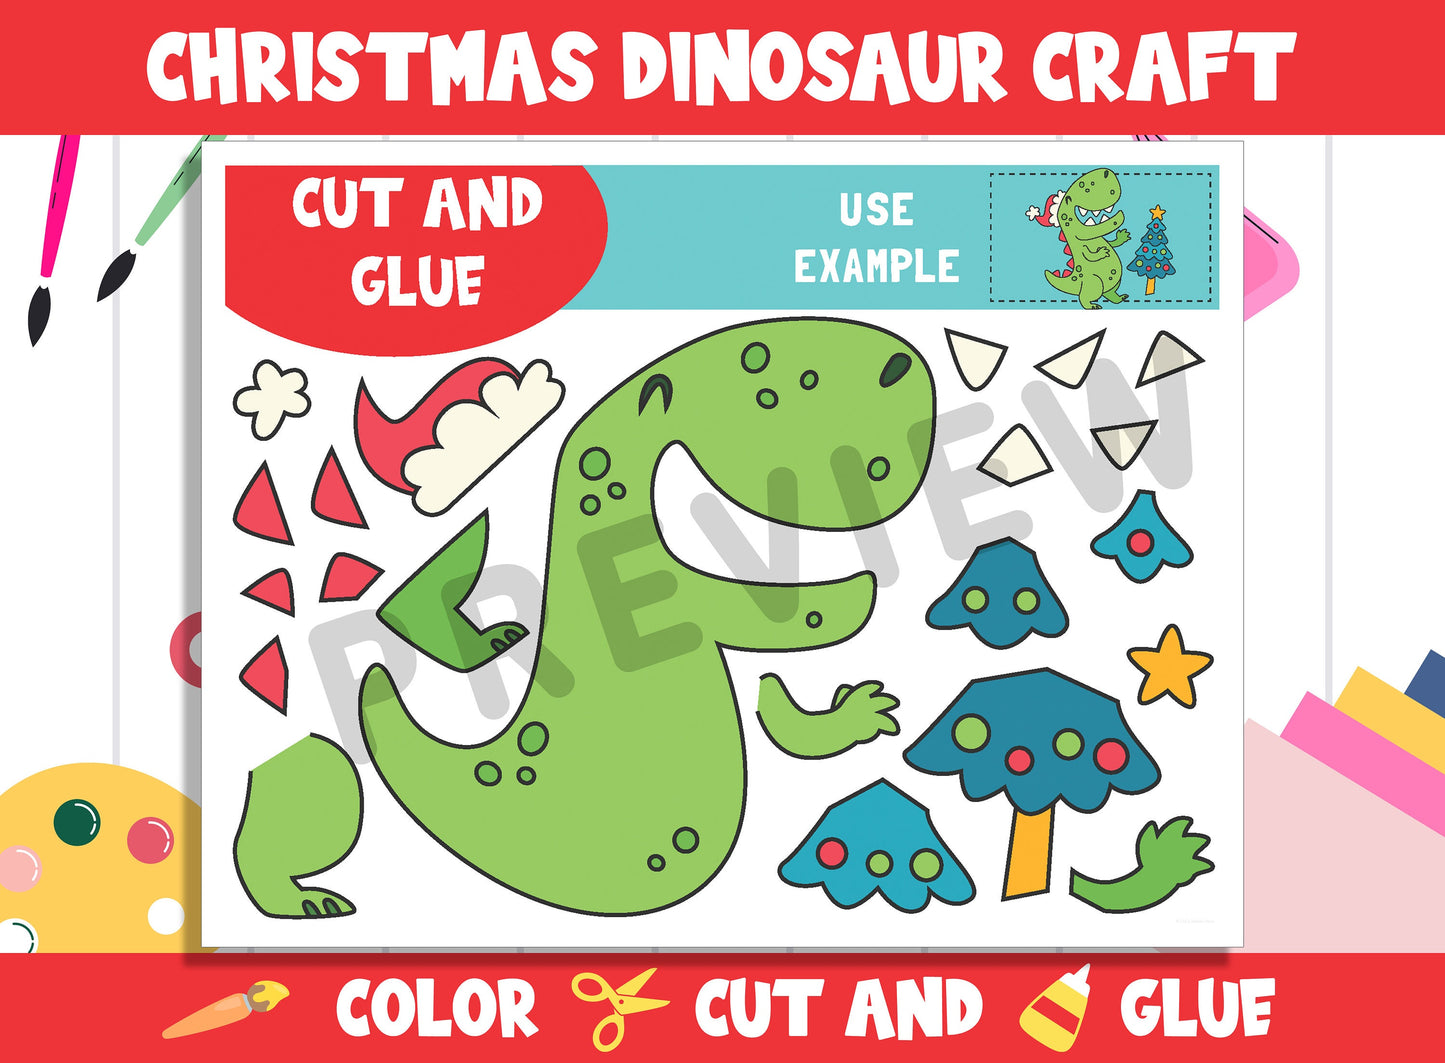 Christmas Dinosaur Craft Activity - Color, Cut, and Glue for PreK to 2nd Grade, PDF File, Instant Download